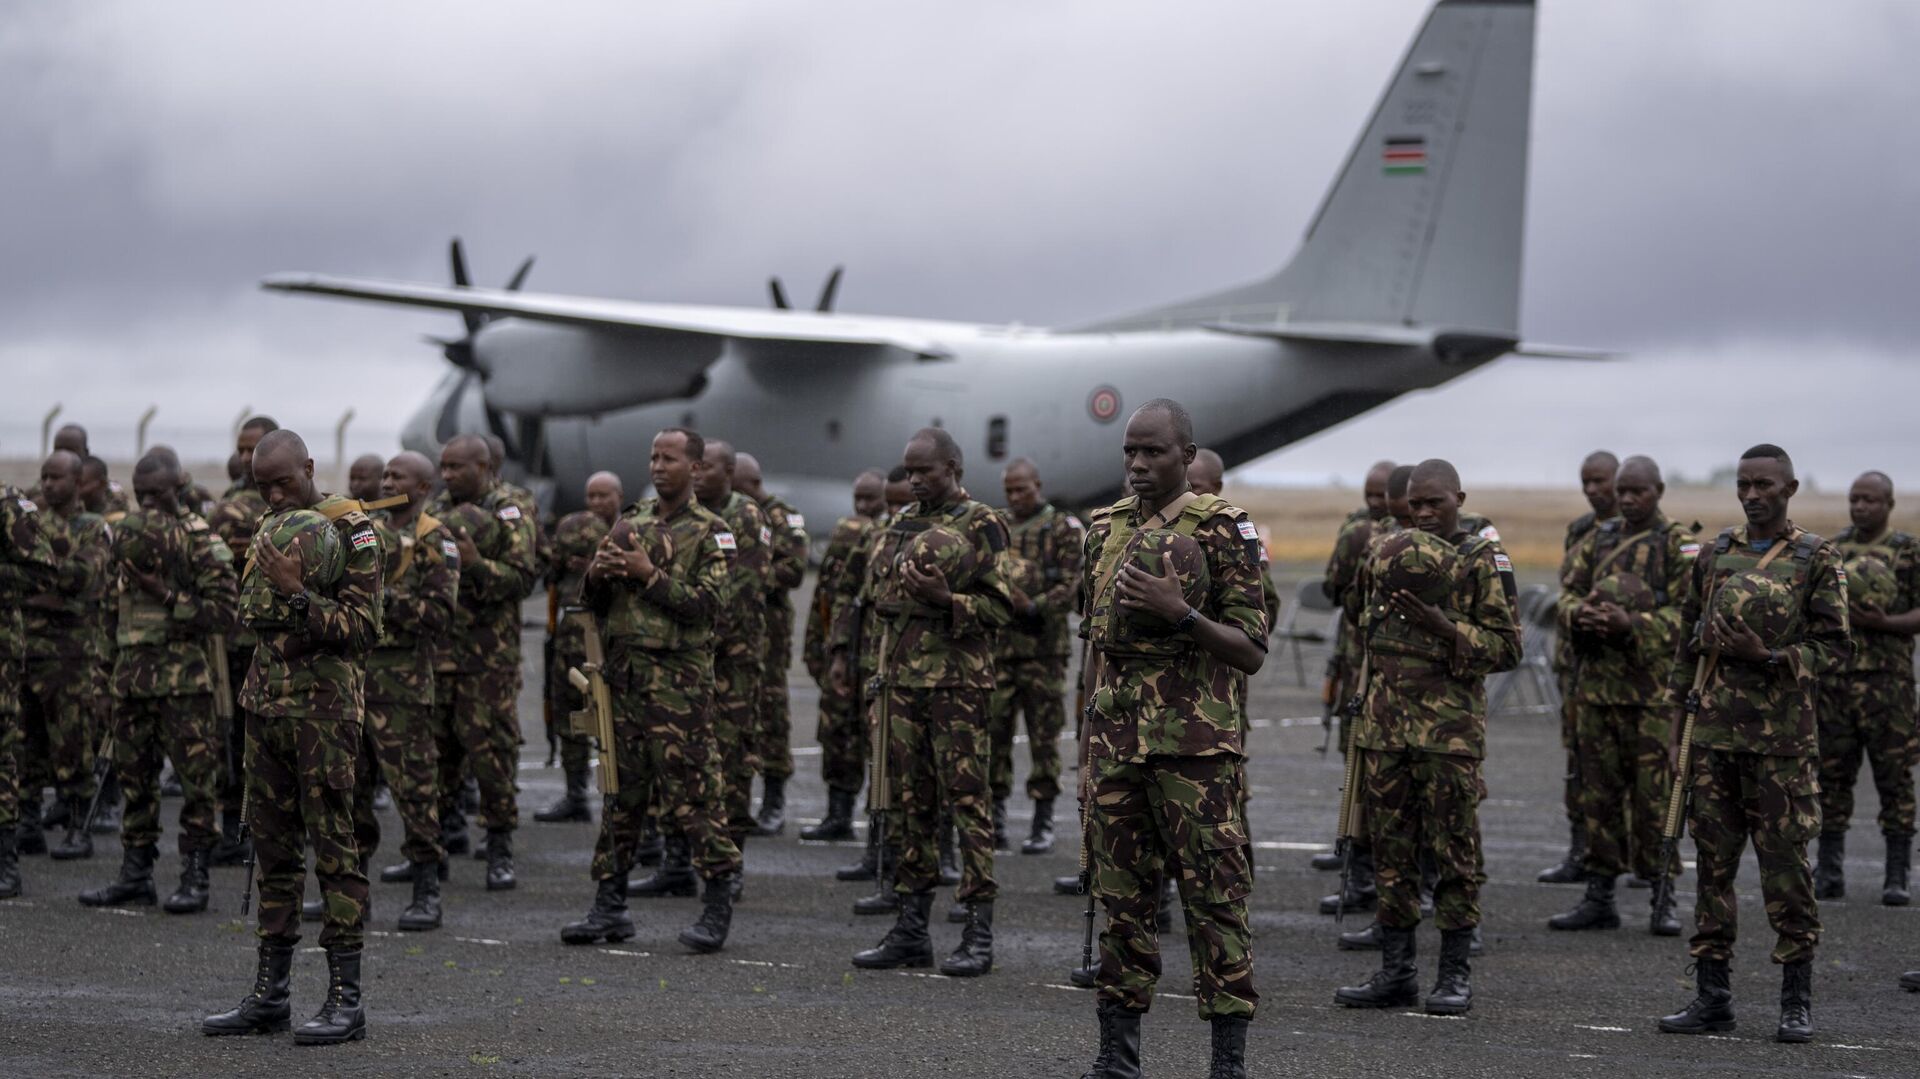 Members of the Kenya Defence Forces (KDF) listen to a prayer spoken by a chaplain as they prepare to deploy to Goma in eastern Congo as part of the East African Community Regional Force (EACRF), at a military airport in Nairobi, Kenya Wednesday, Nov. 16, 2022 - Sputnik International, 1920, 10.02.2023